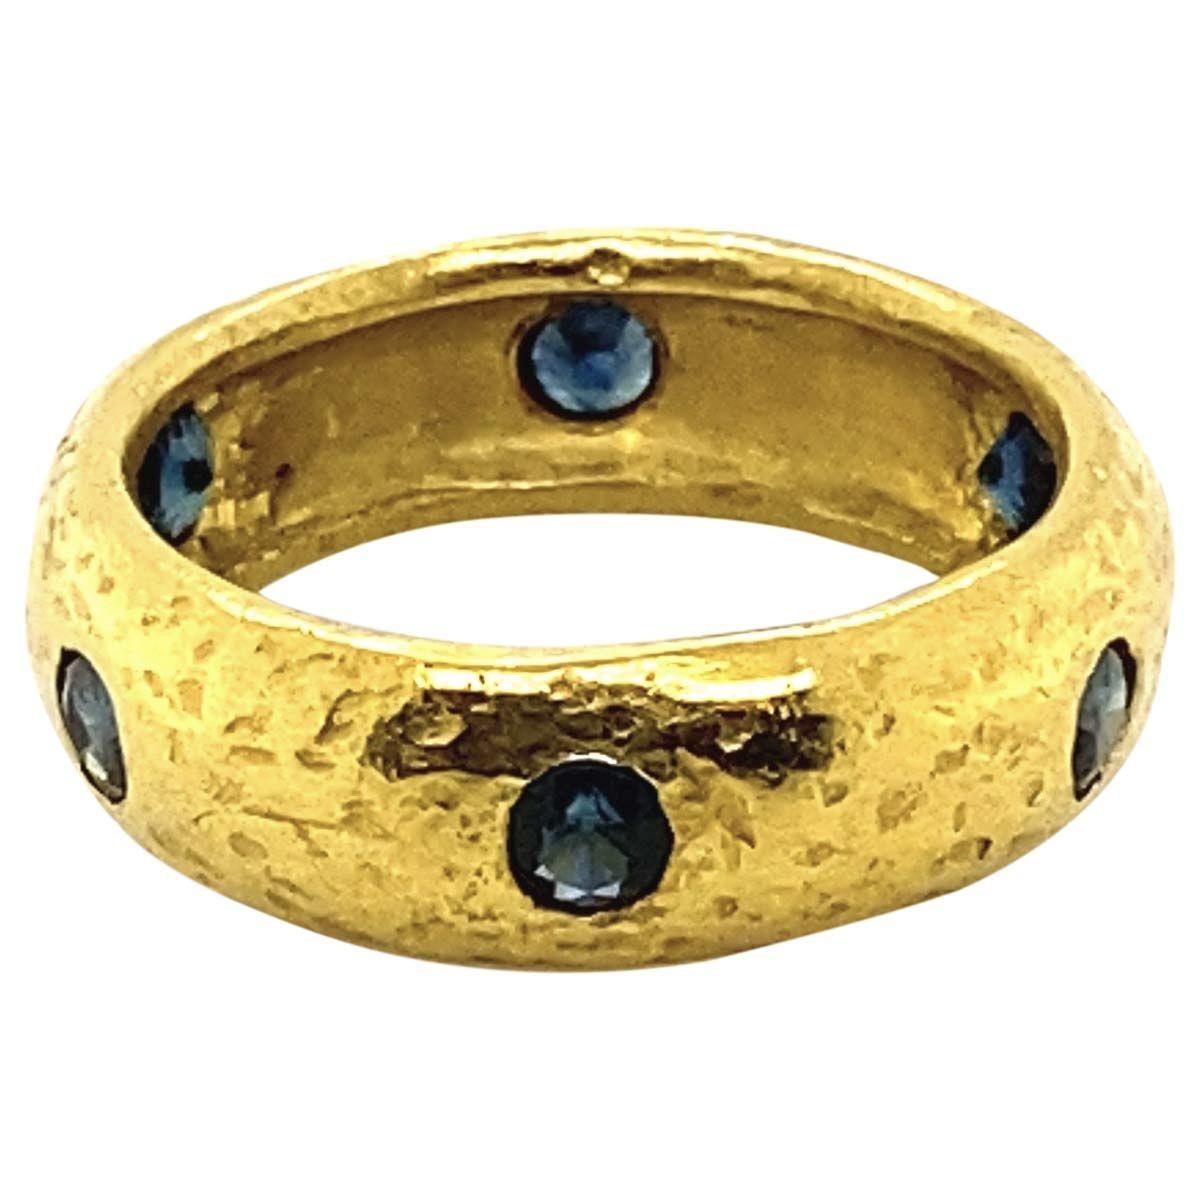 Contemporary 22 Karat Yellow Gold Sapphire and Ruby Hammer Band Rings - Size 6.75 For Sale